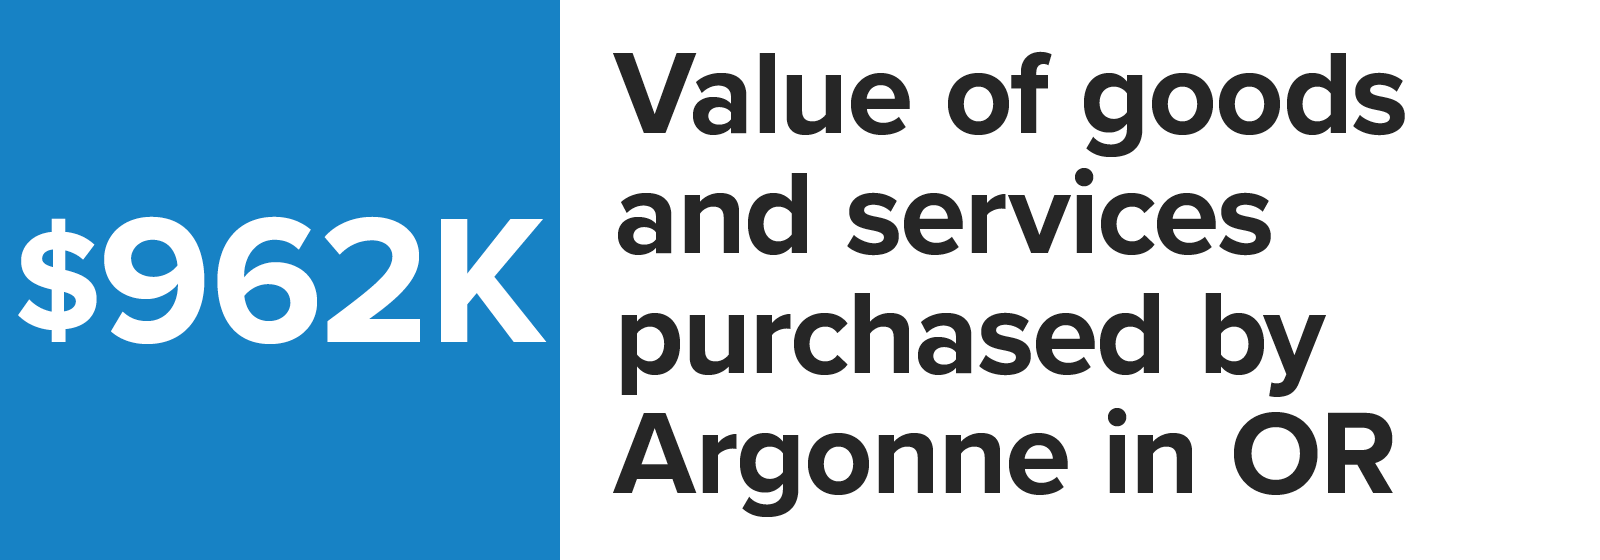 Number graphic value of goods and services purchased by Argonne in Oregon